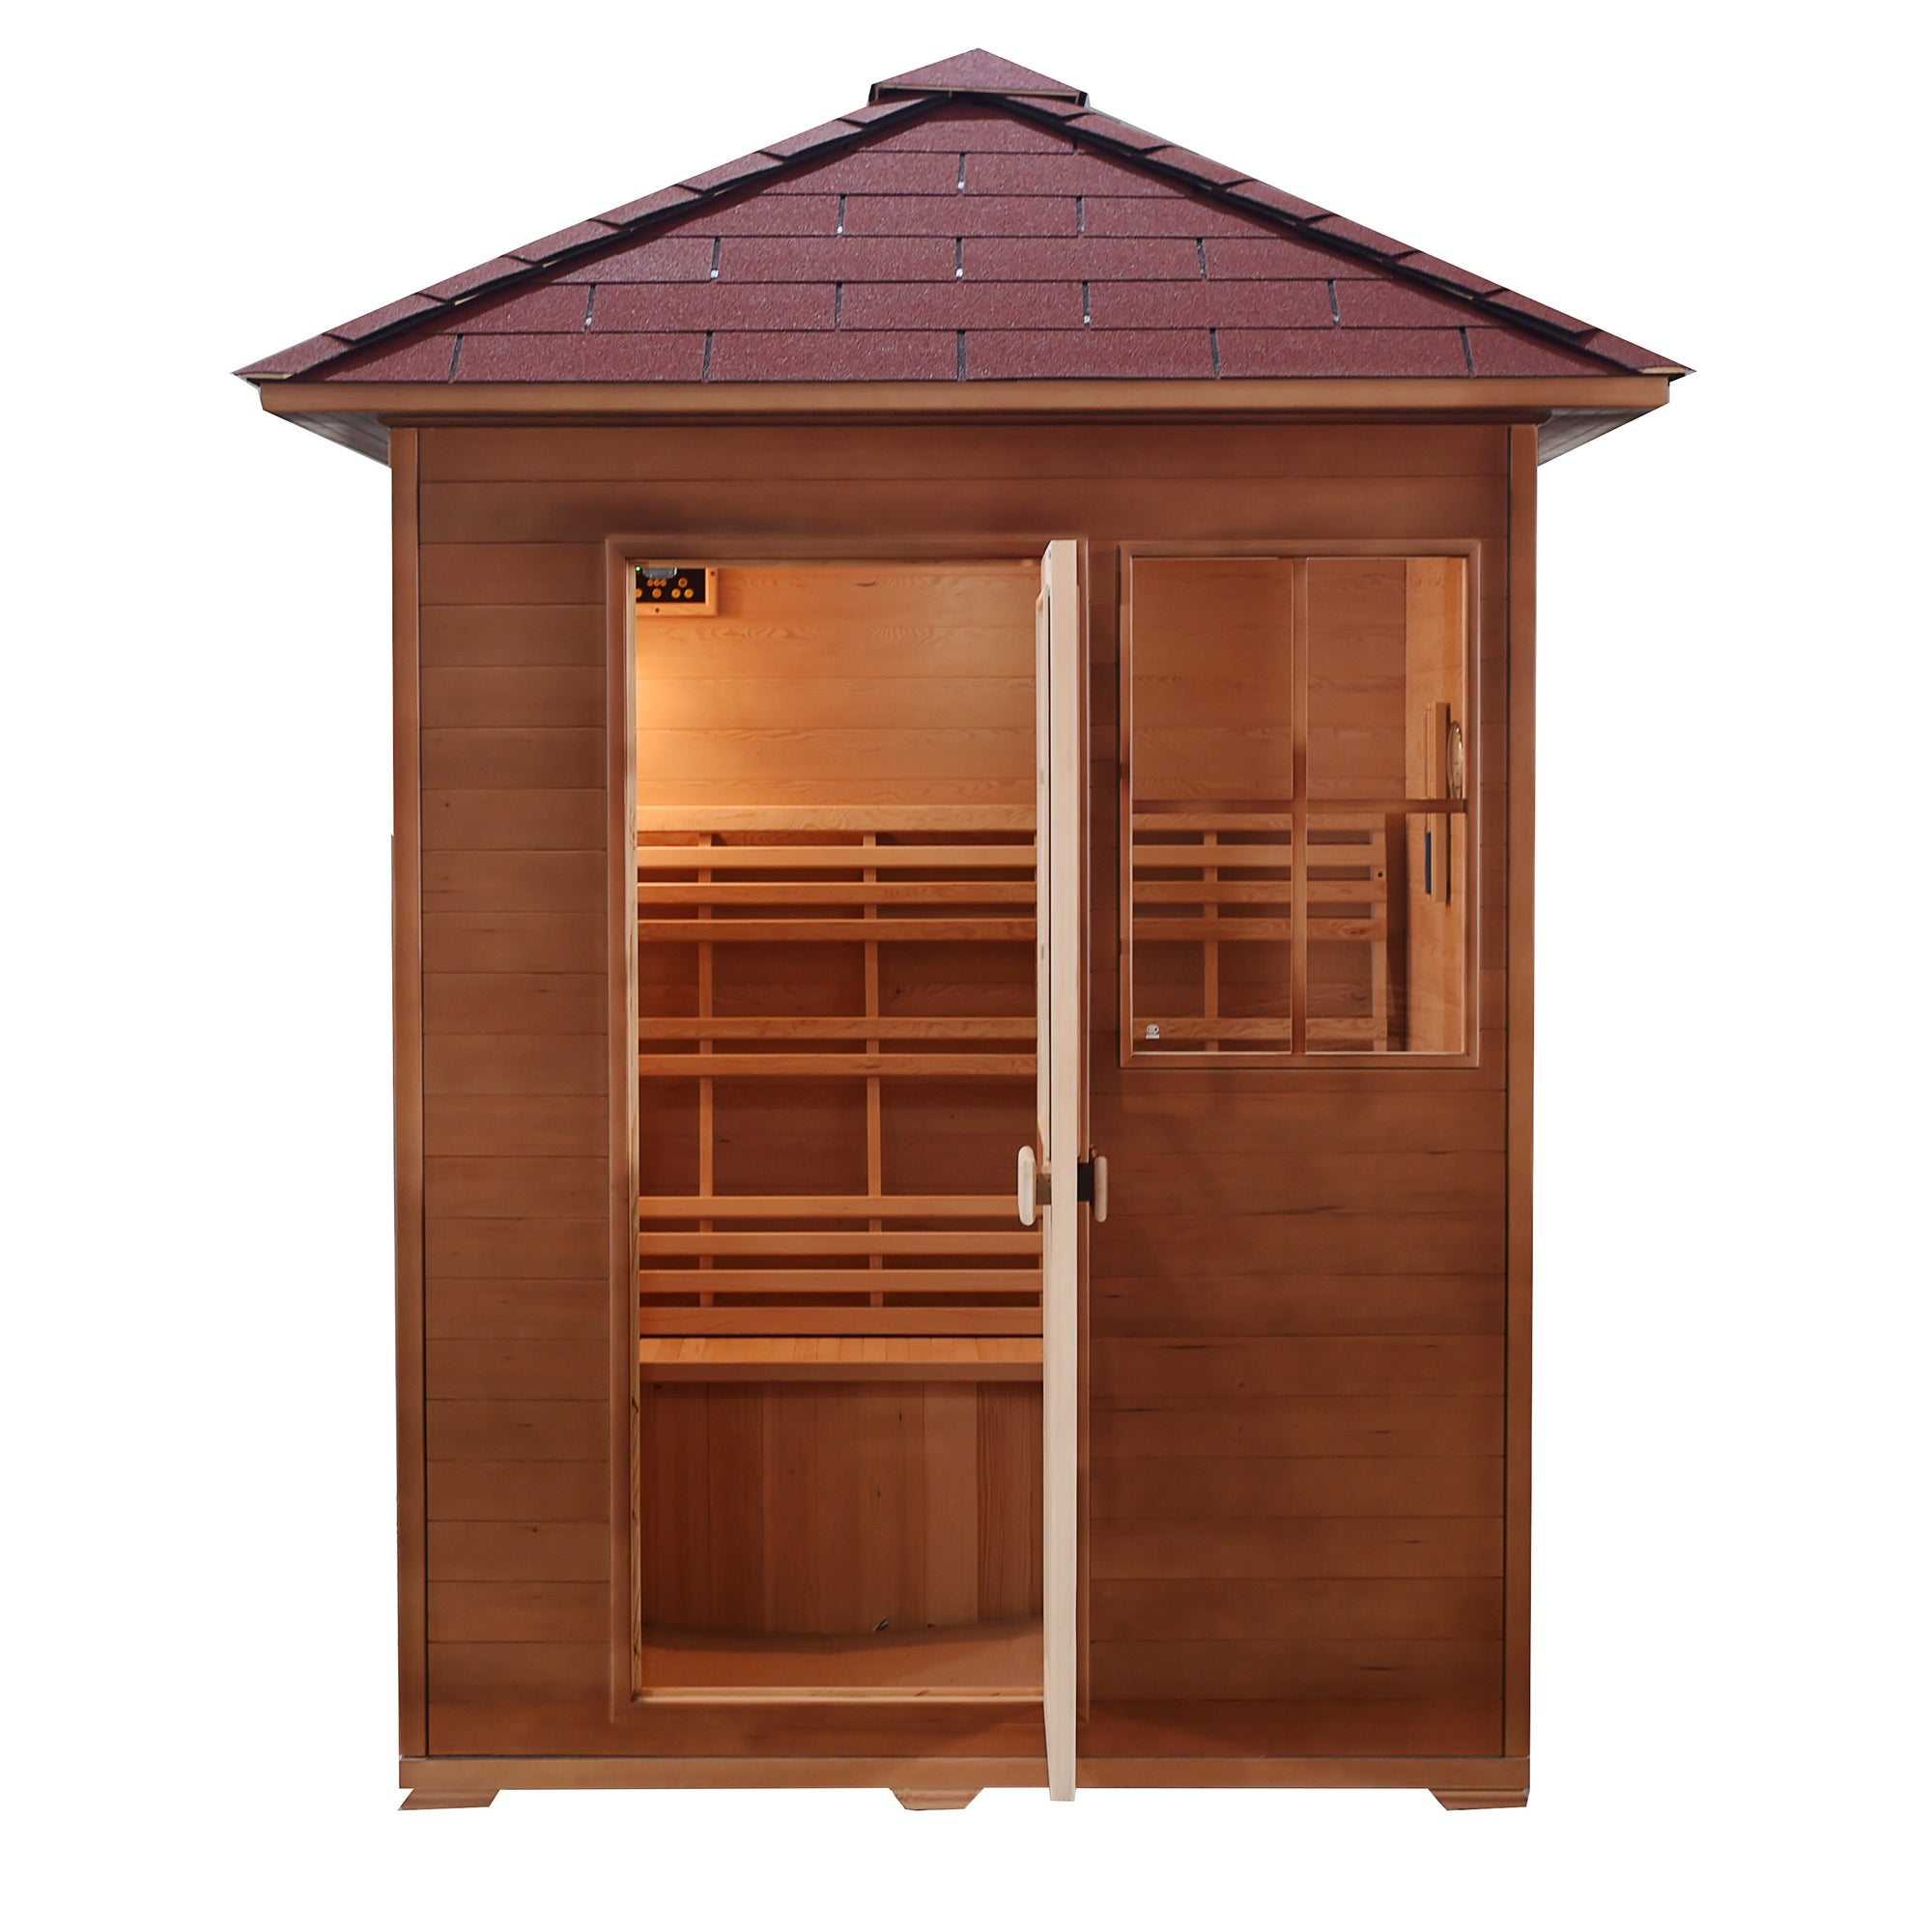 SunRay Freeport 3-Person Outdoor Traditional Sauna - Canadian hemlock wood with shingled roof, front window and glass enclosed door - HL300D1 Freeport - Isometric view